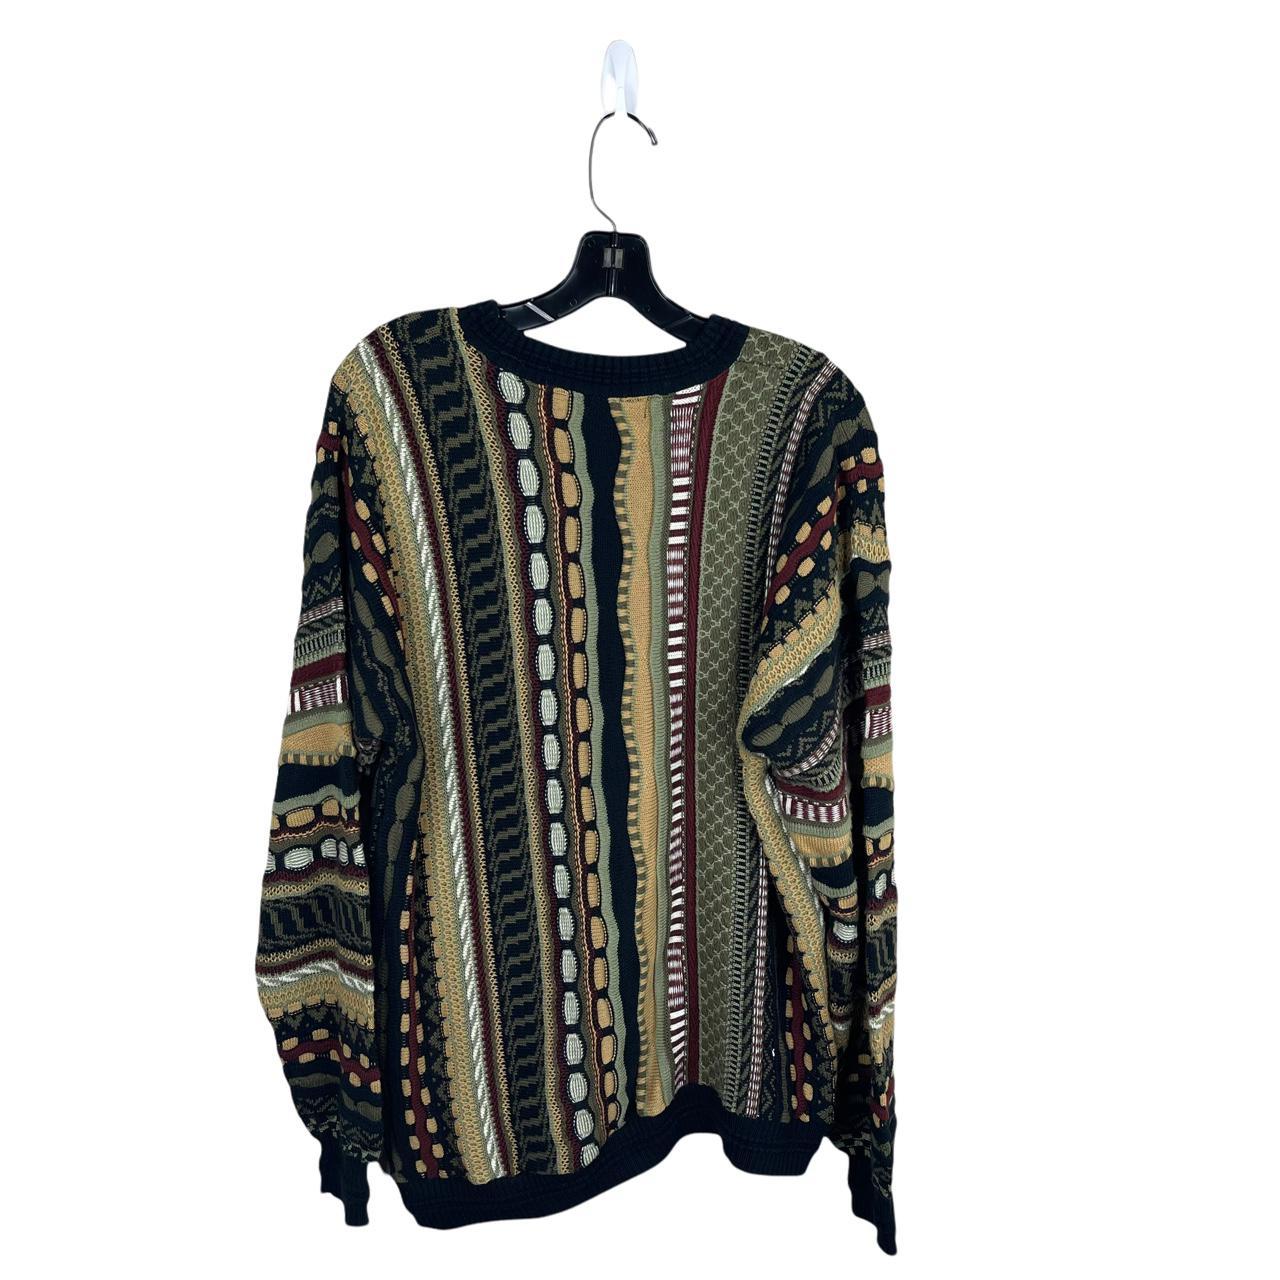 Product Image 2 - Vintage 90s Coogi Style Knit